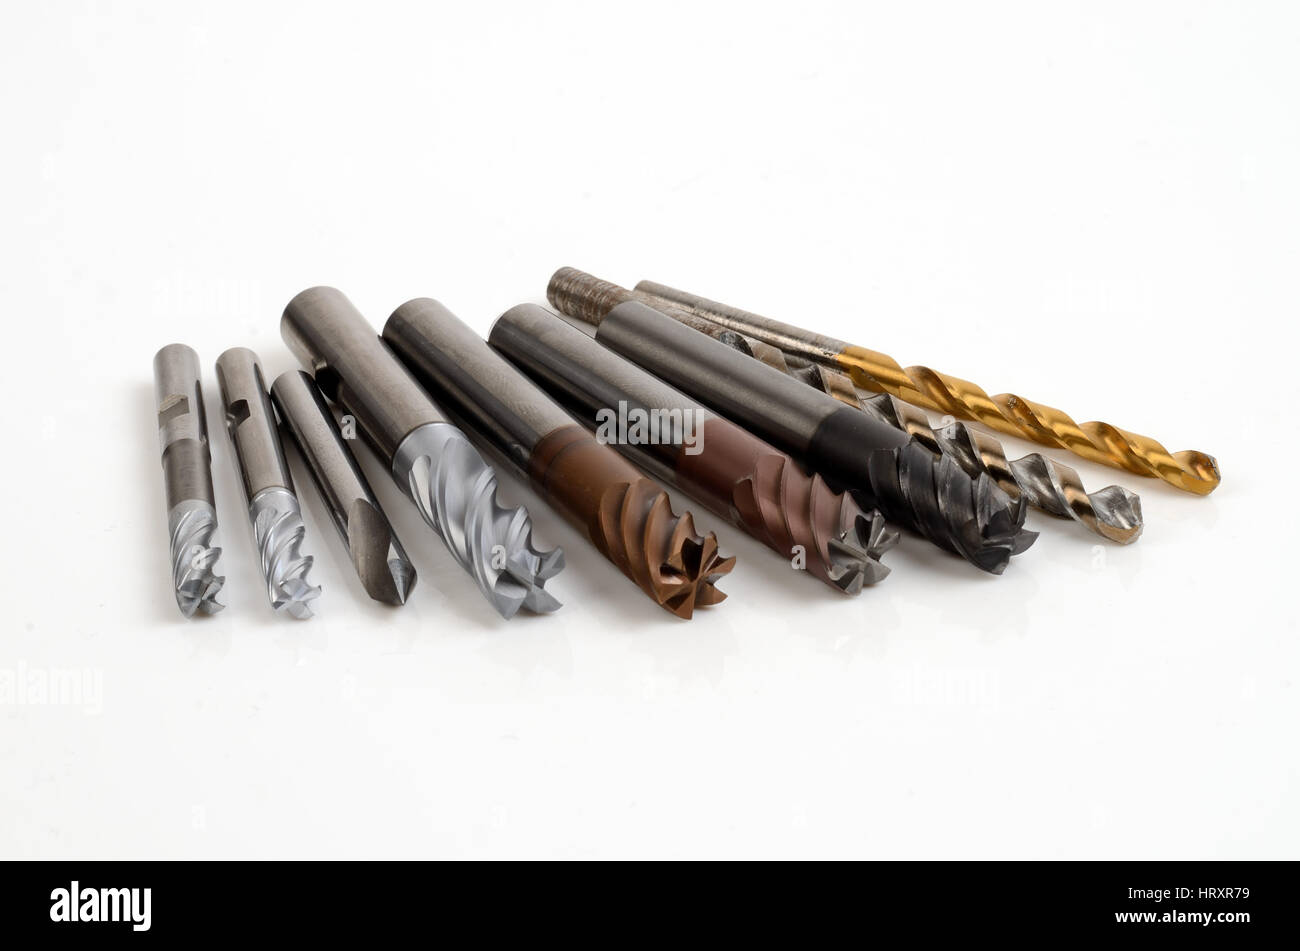 Metal milling tools for cnc machine on white background Stock Photo